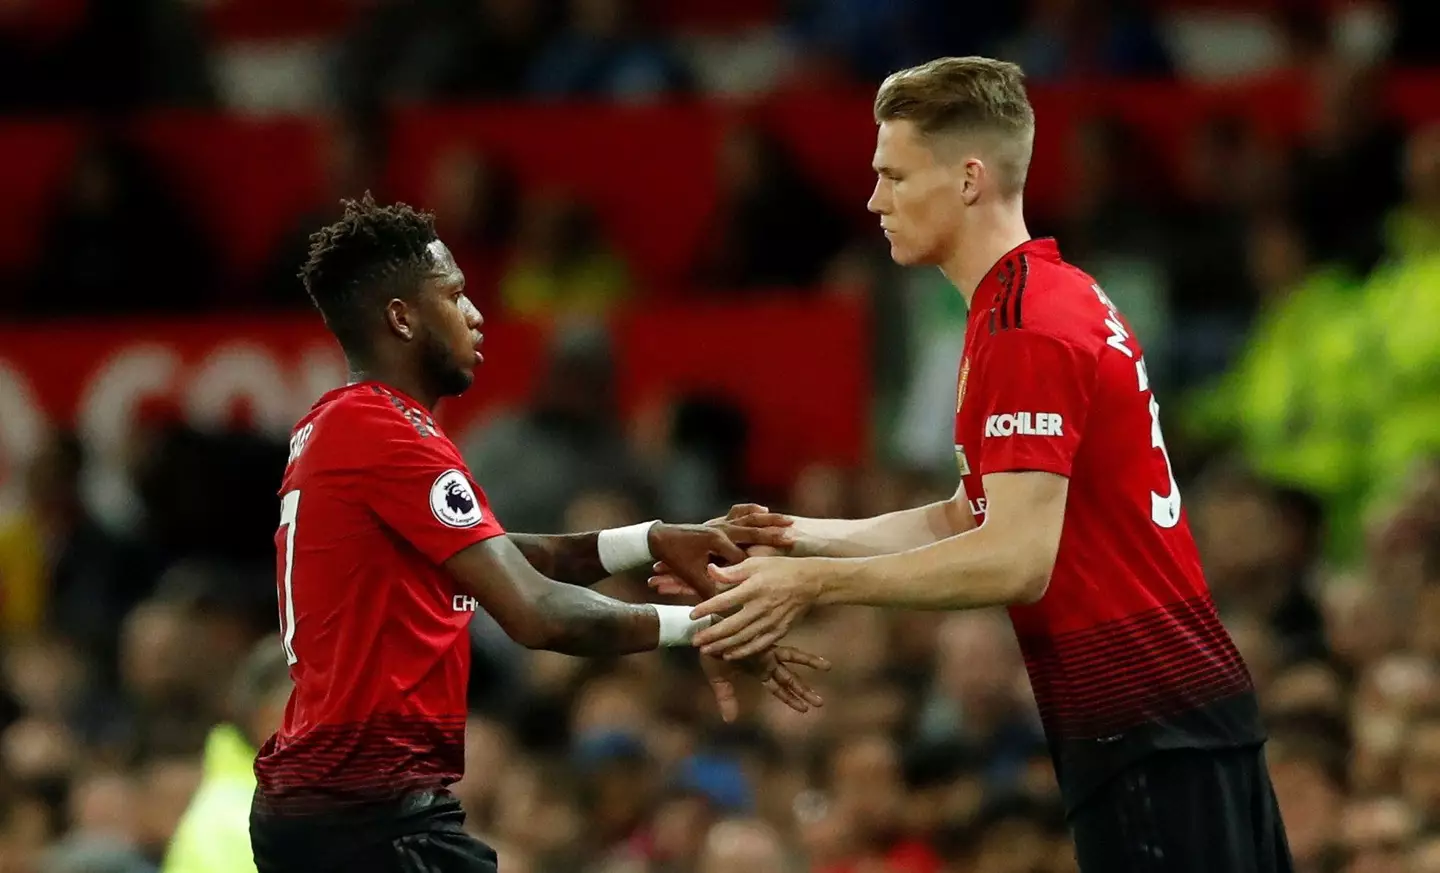 Fred and Scott McTominay are United's regular midfield pairing. (Image